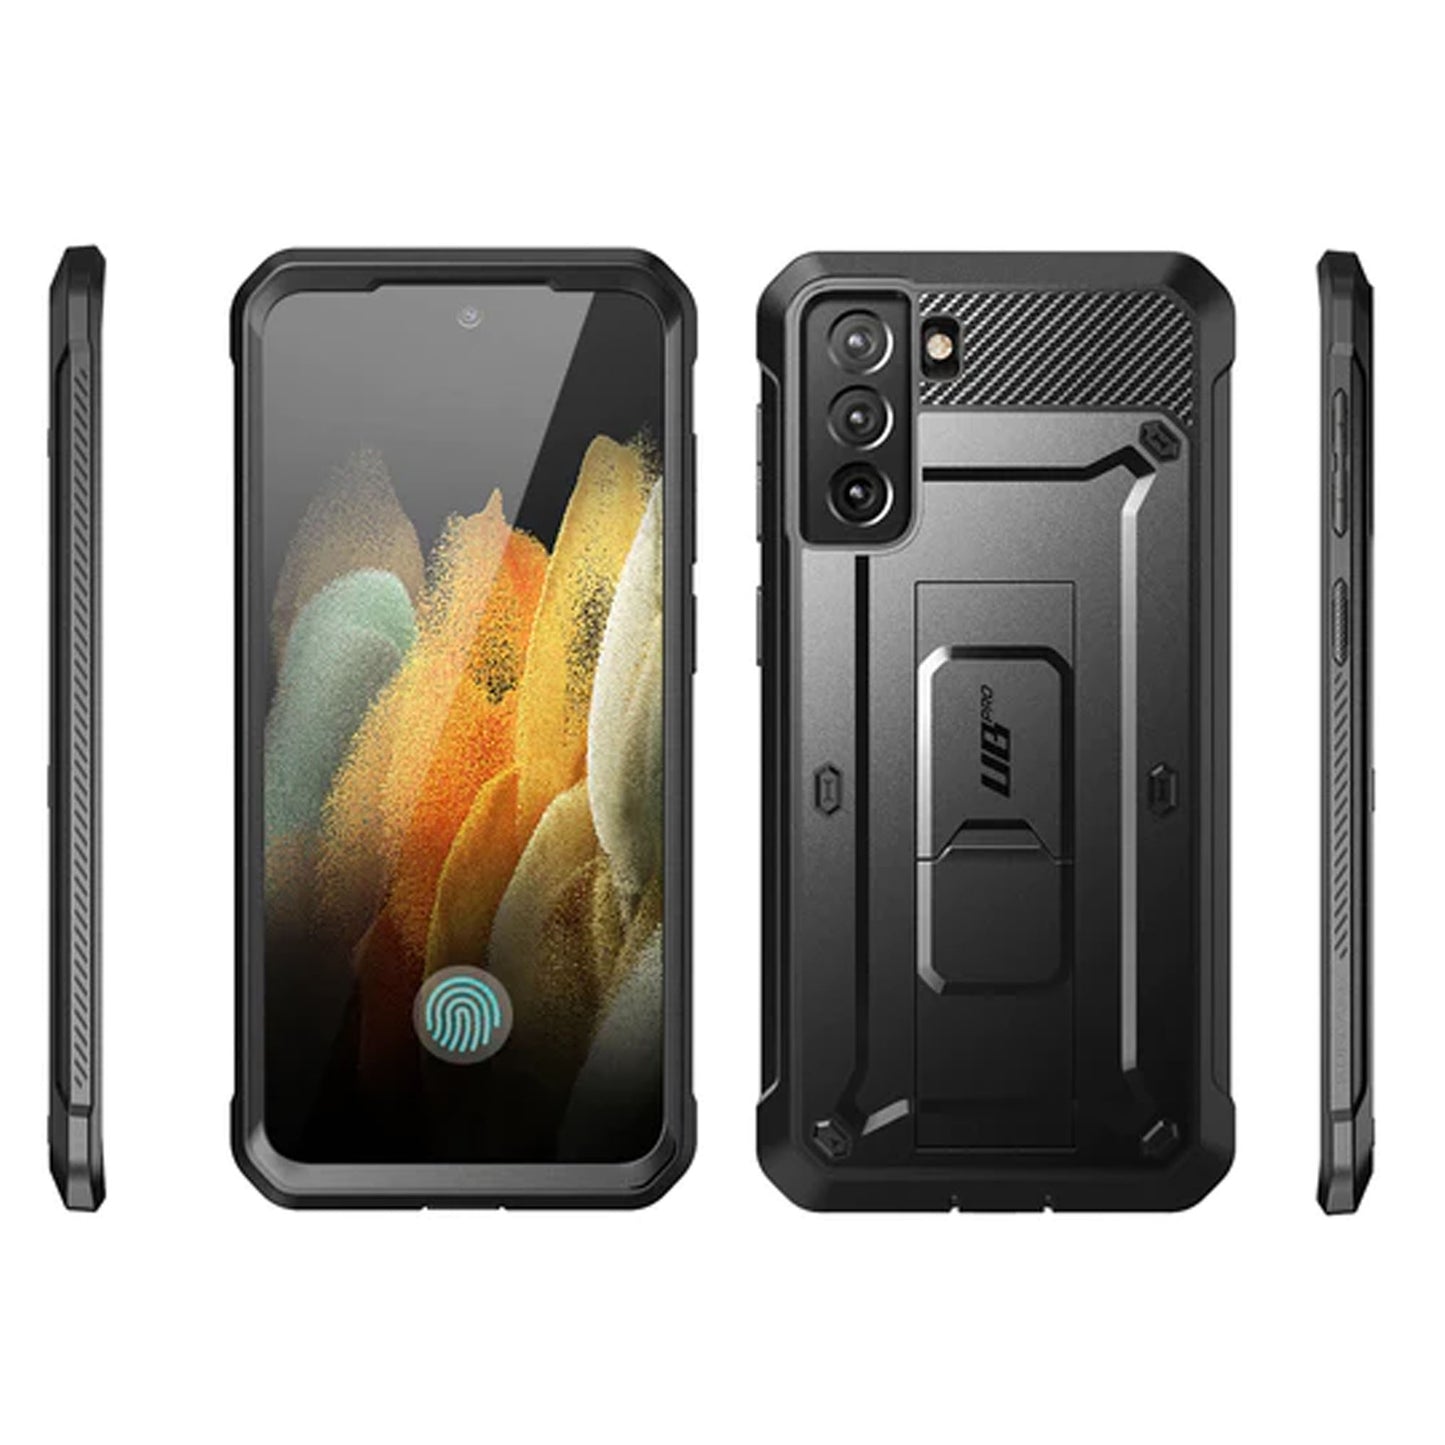 Supcase Unicorn Beetle Pro Rugged Case for Samsung Galaxy S21 - Black (Barcode: 843439135390 )